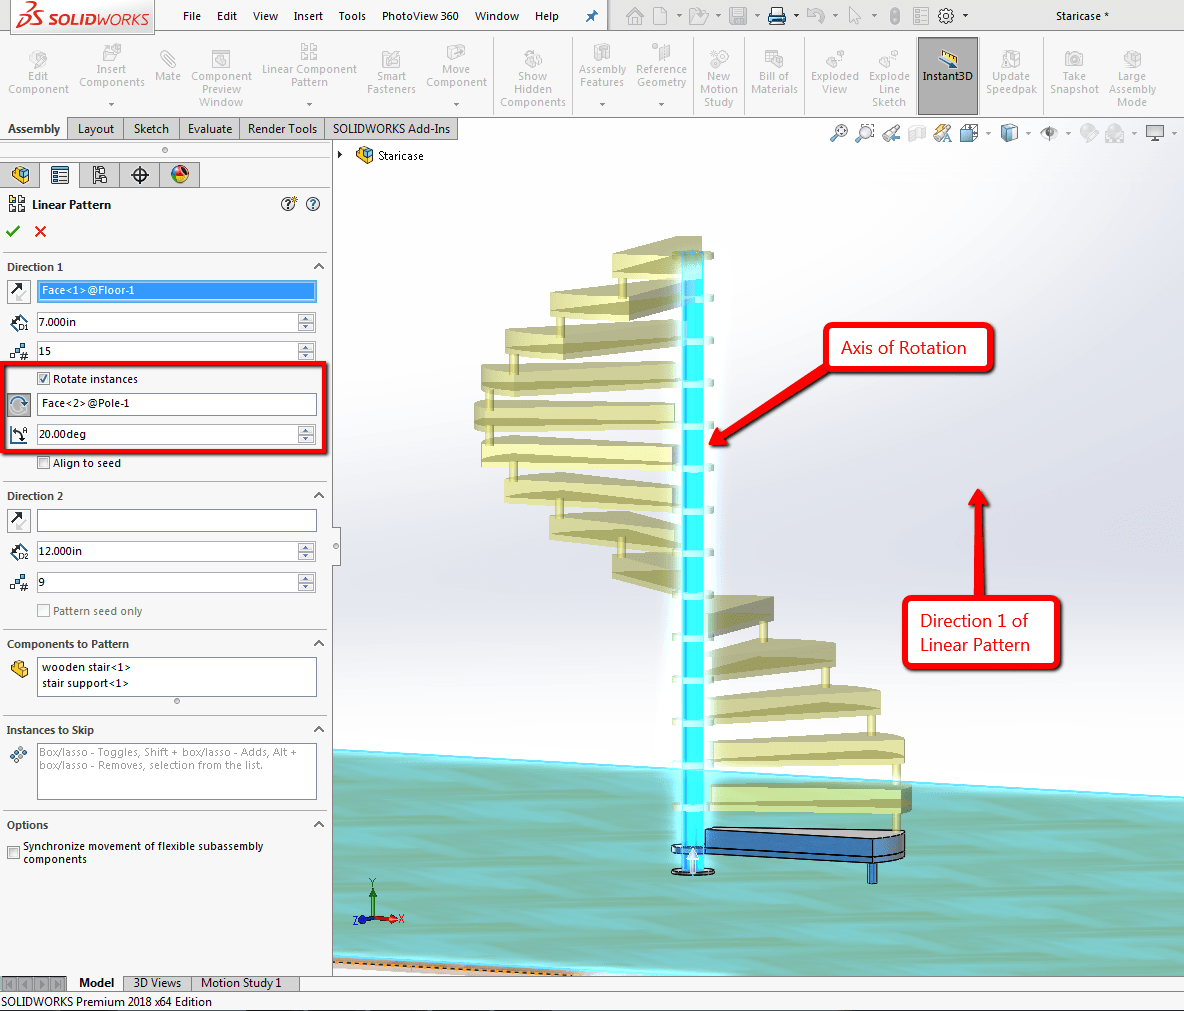 SOLIDWORKS 2018: What's New - Rotate with Linear Pattern